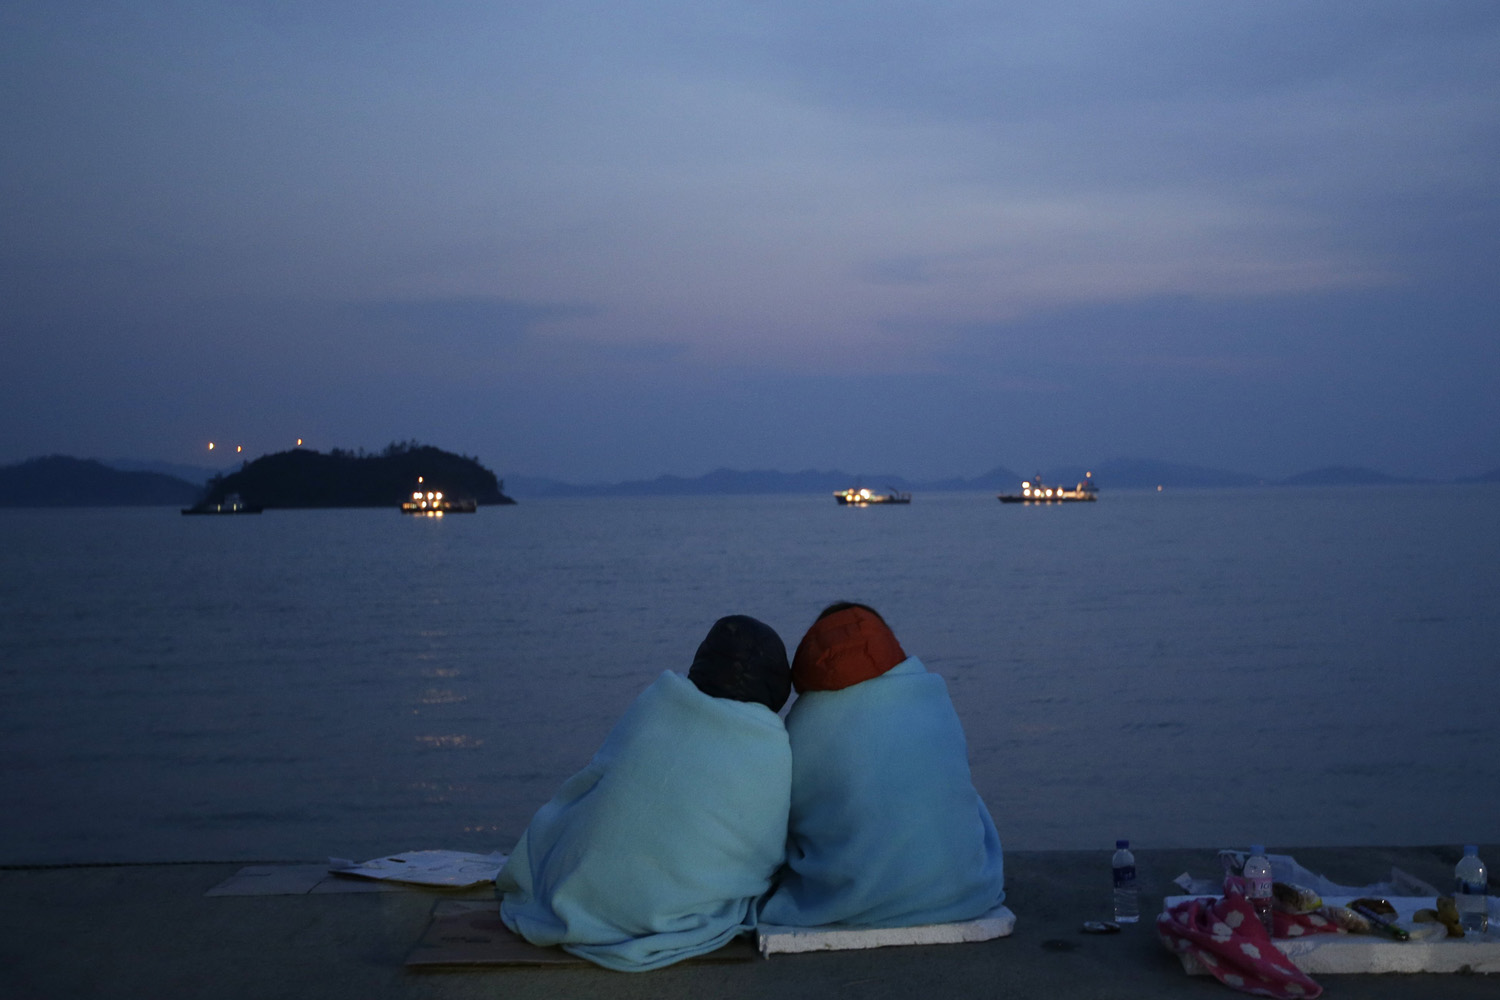 Apr. 20, 2014. Relatives of passengers aboard the sunken ferry Sewol sit near the sea at a port in Jindo, south of Seoul, South Korea. After more than three days of frustration and failure, divers on Sunday finally found a way into the submerged ferry off South Korea's southern shore, discovering more than a dozen bodies inside the ship.